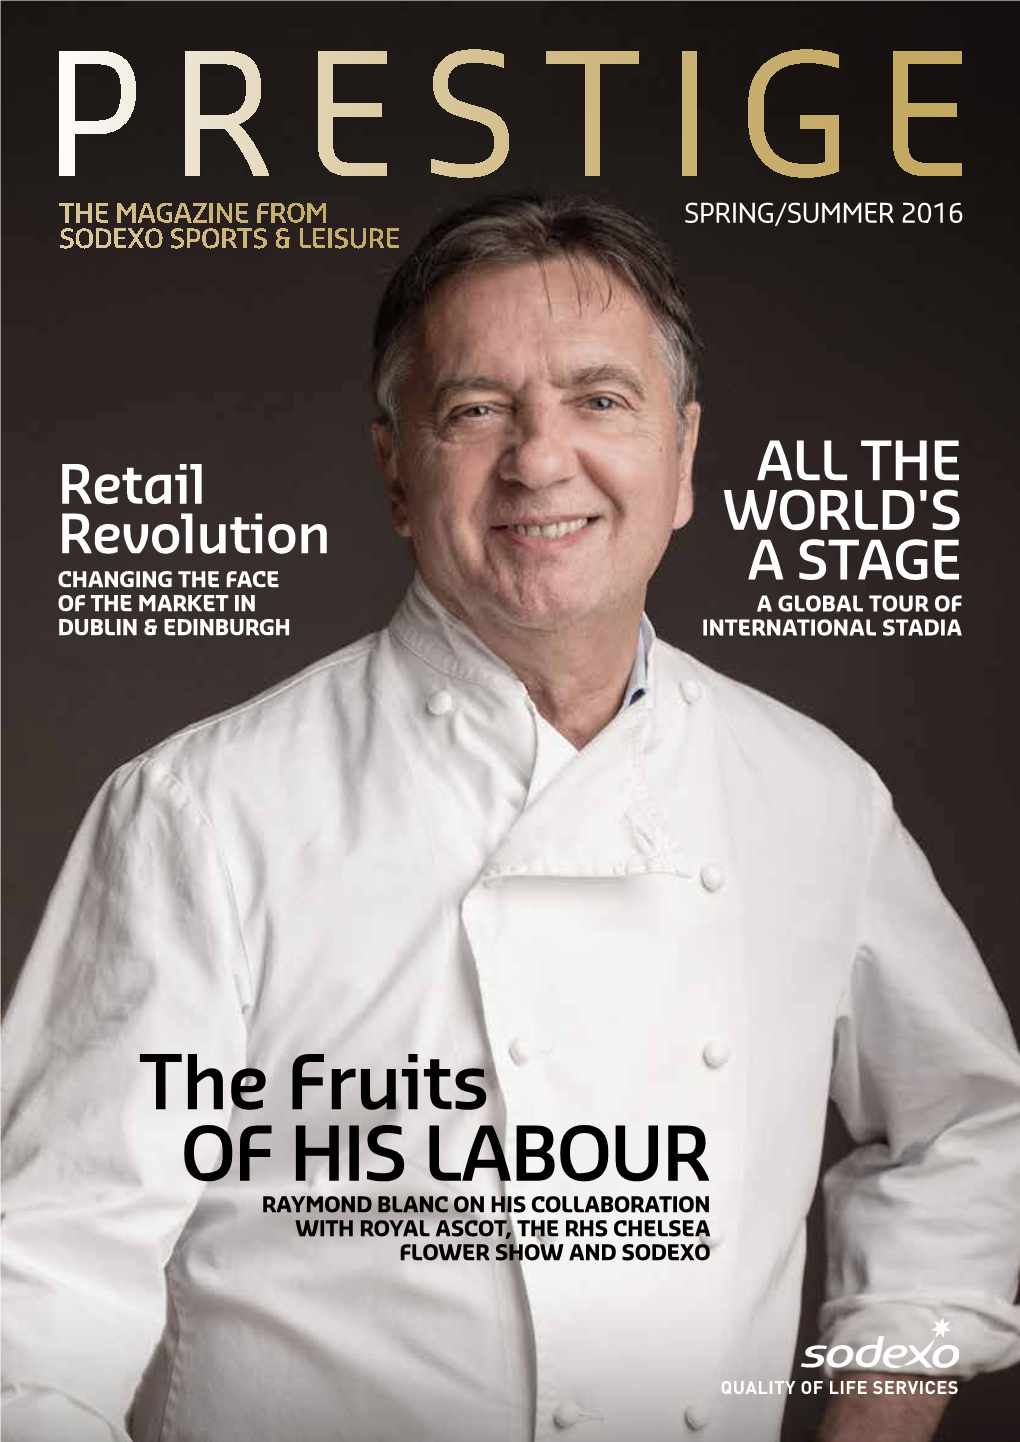 The Fruits of His Labour Raymond Blanc on His Collaboration with Royal Ascot, the RHS Chelsea Flower Show and Sodexo Welcome